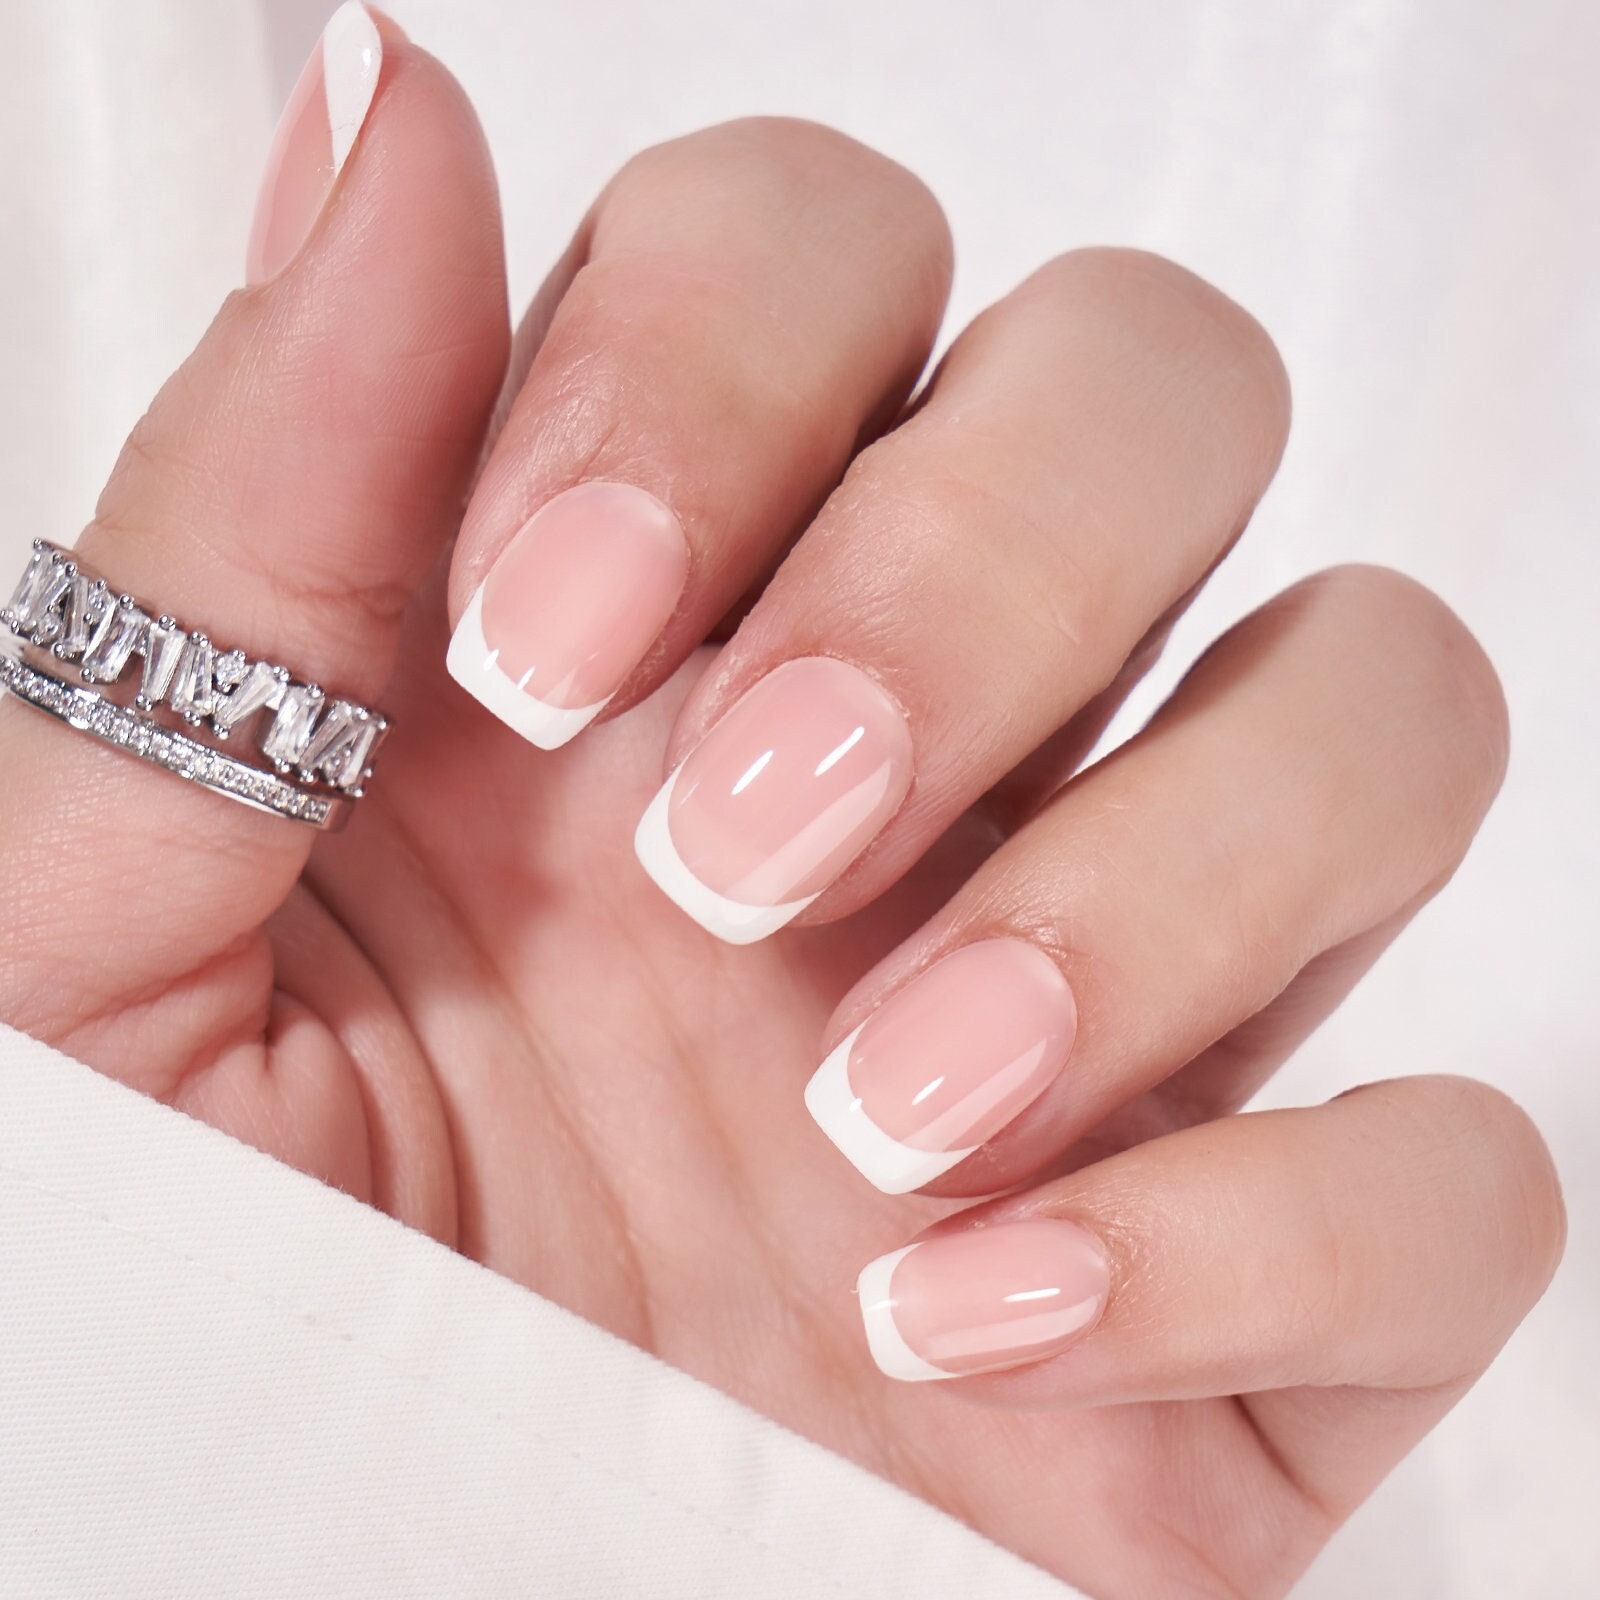 Ombre Glossy White French Short French Nails Set Short Square Full Cover  Press On Tips For Instant, Artificial Fingernails With Acrylic Manicure  From Cuteage, $1.84 | DHgate.Com